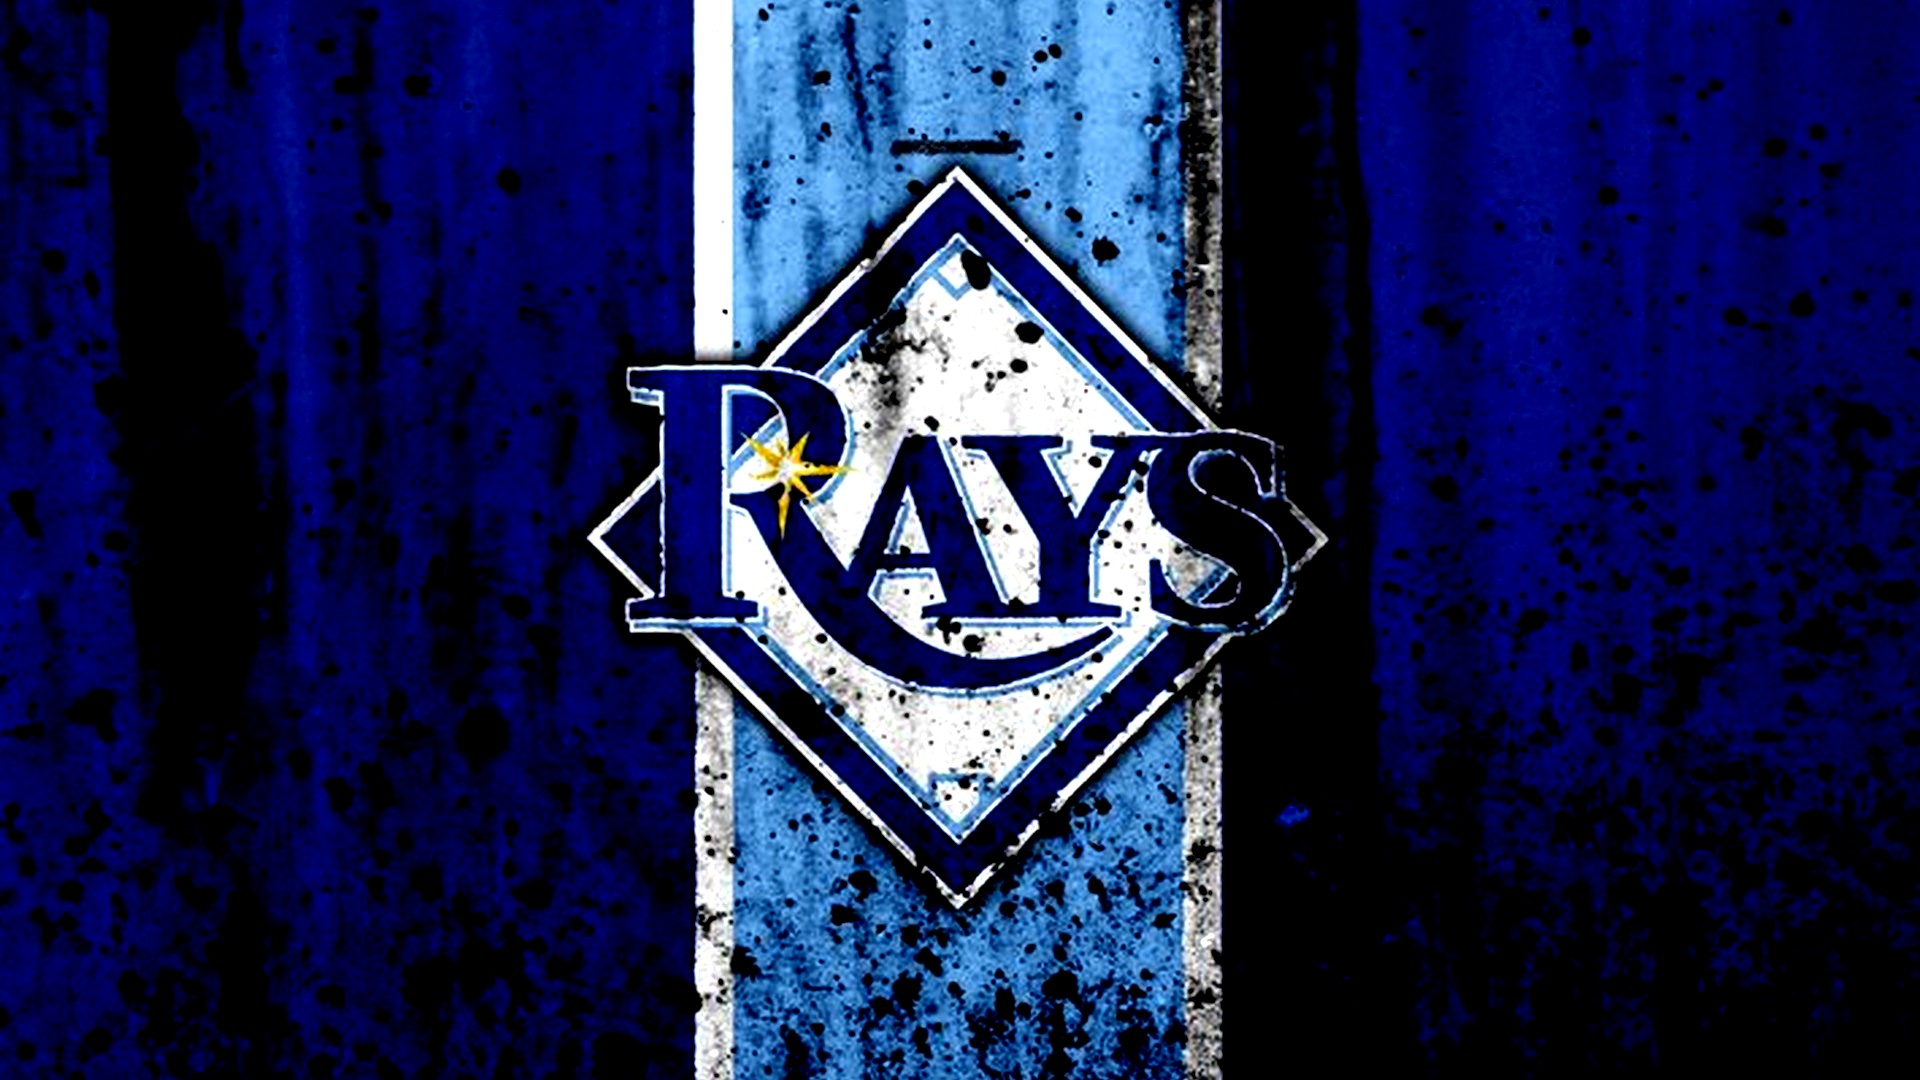 Tampa Bay Rays Logo Desktop Backgrounds with high-resolution 1920x1080 pixel. You can use this wallpaper for Mac Desktop Wallpaper, Laptop Screensavers, Android Wallpapers, Tablet or iPhone Home Screen and another mobile phone device